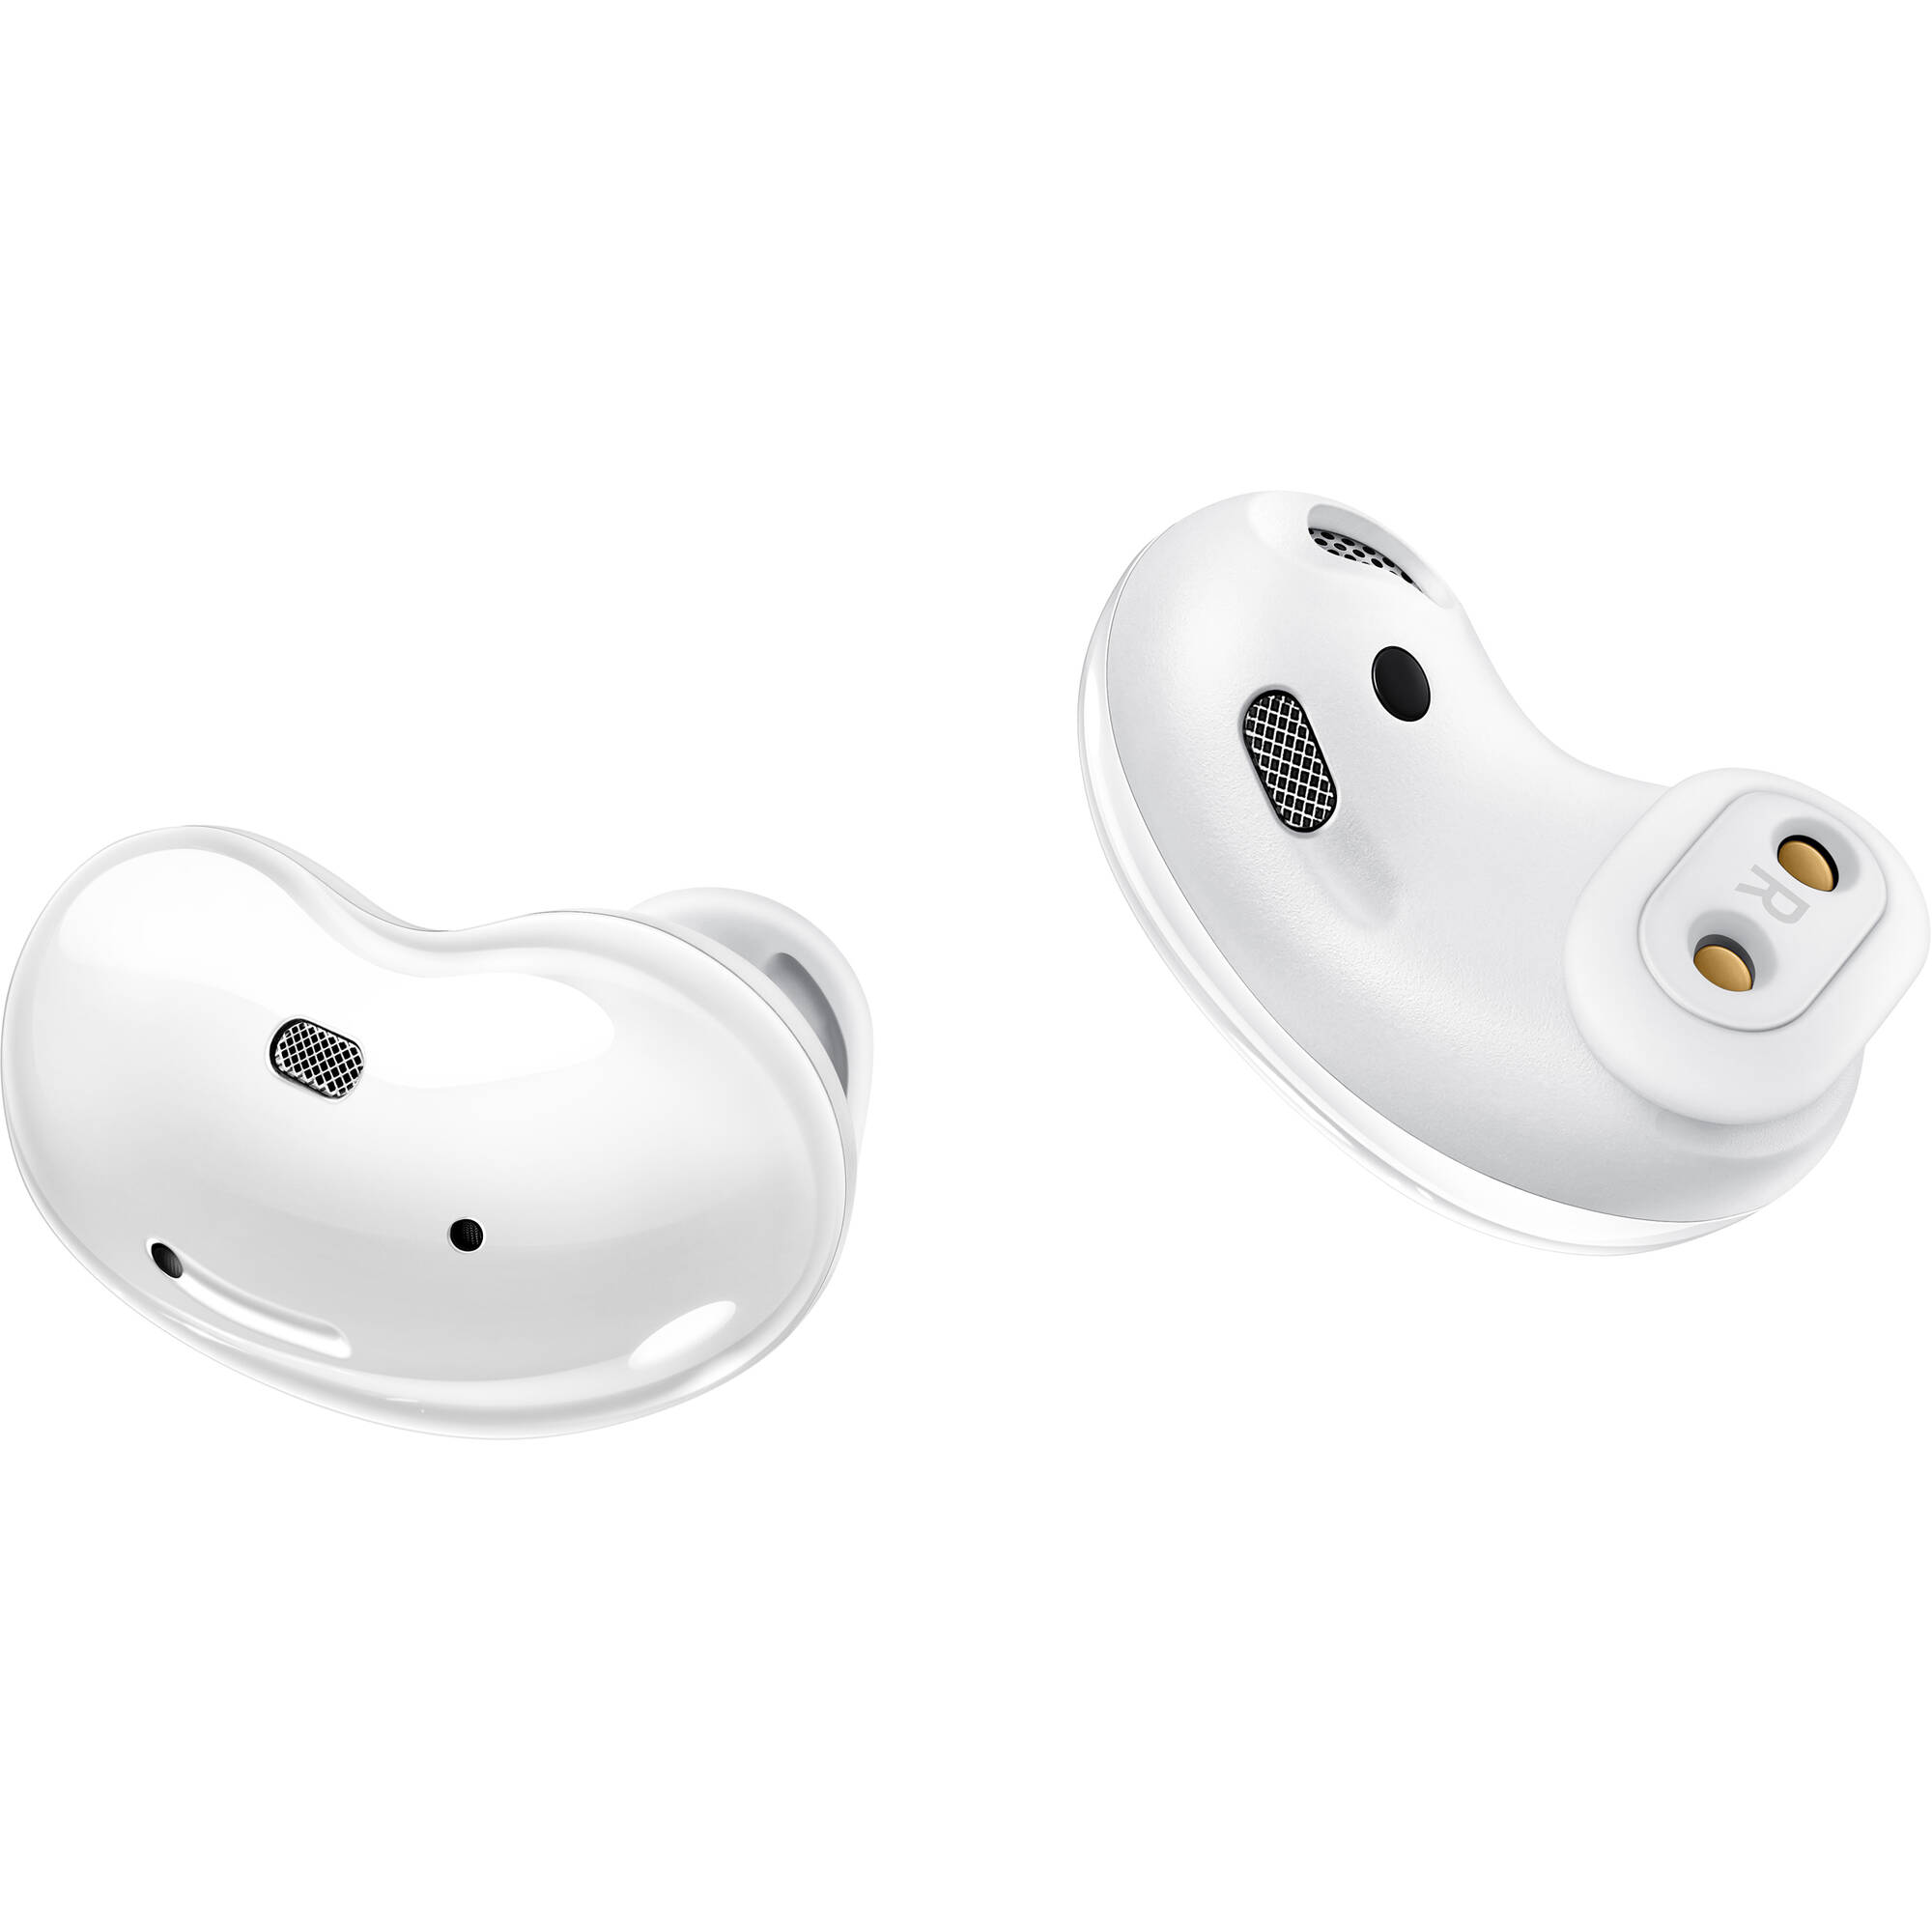 Samsung Galaxy Buds Live Noise-Canceling True Wireless auriculares auriculares (White Mystic)